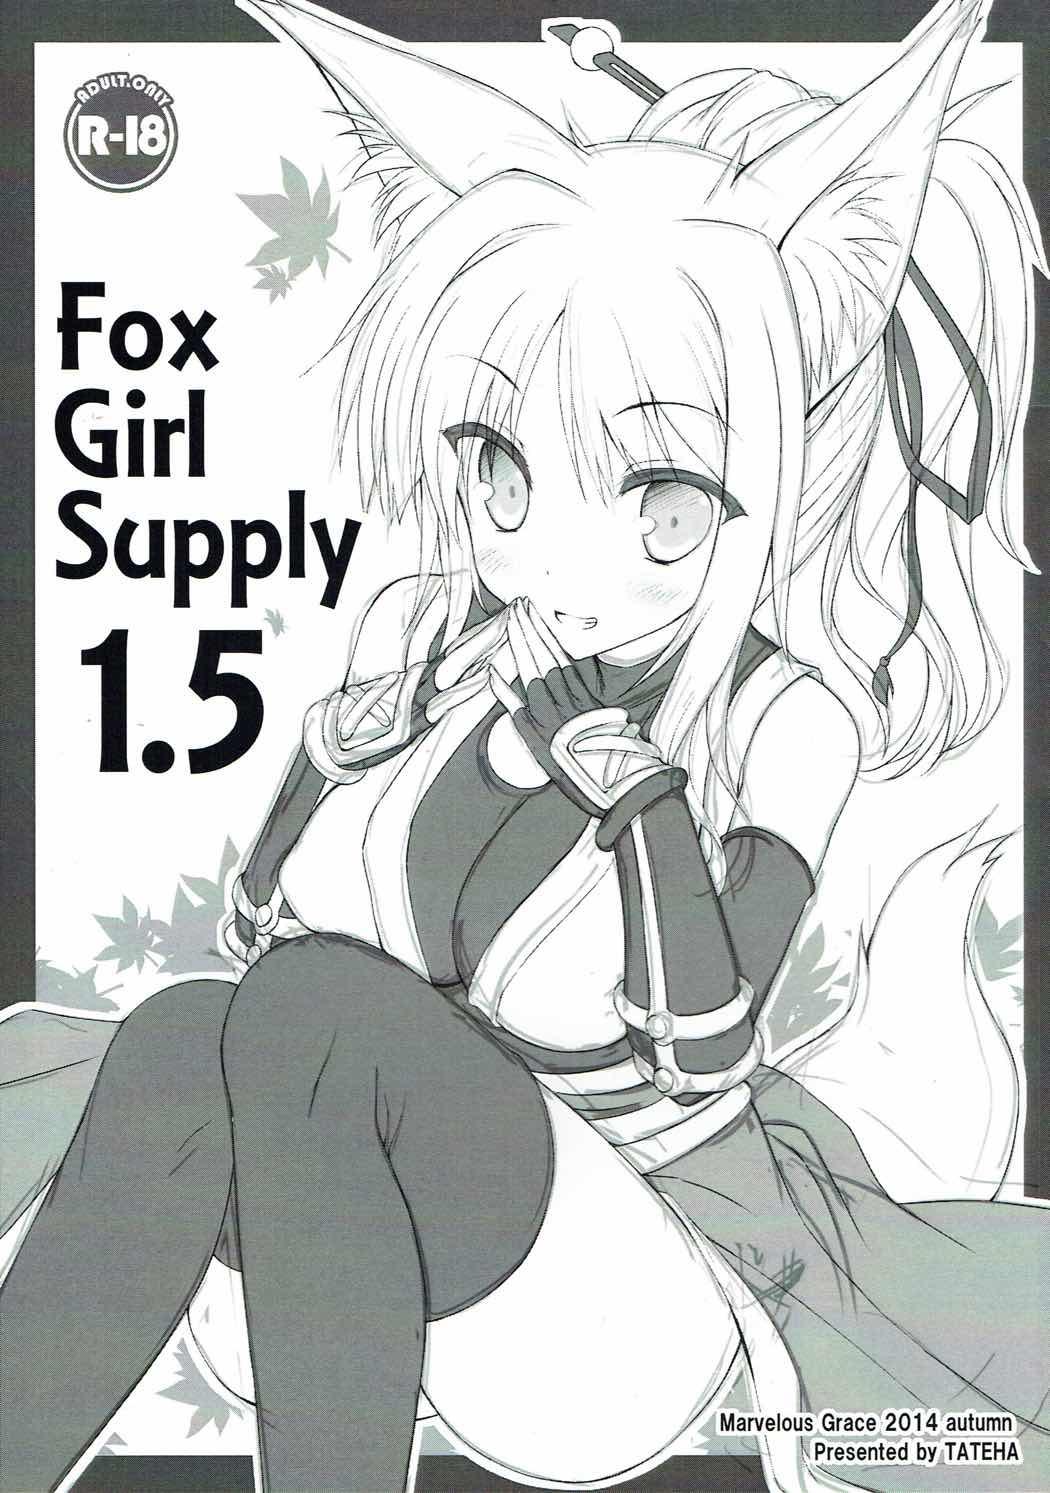 Arrecha Fox Girl Supply 1.5 - Dog days Free 18 Year Old Porn - Picture 1